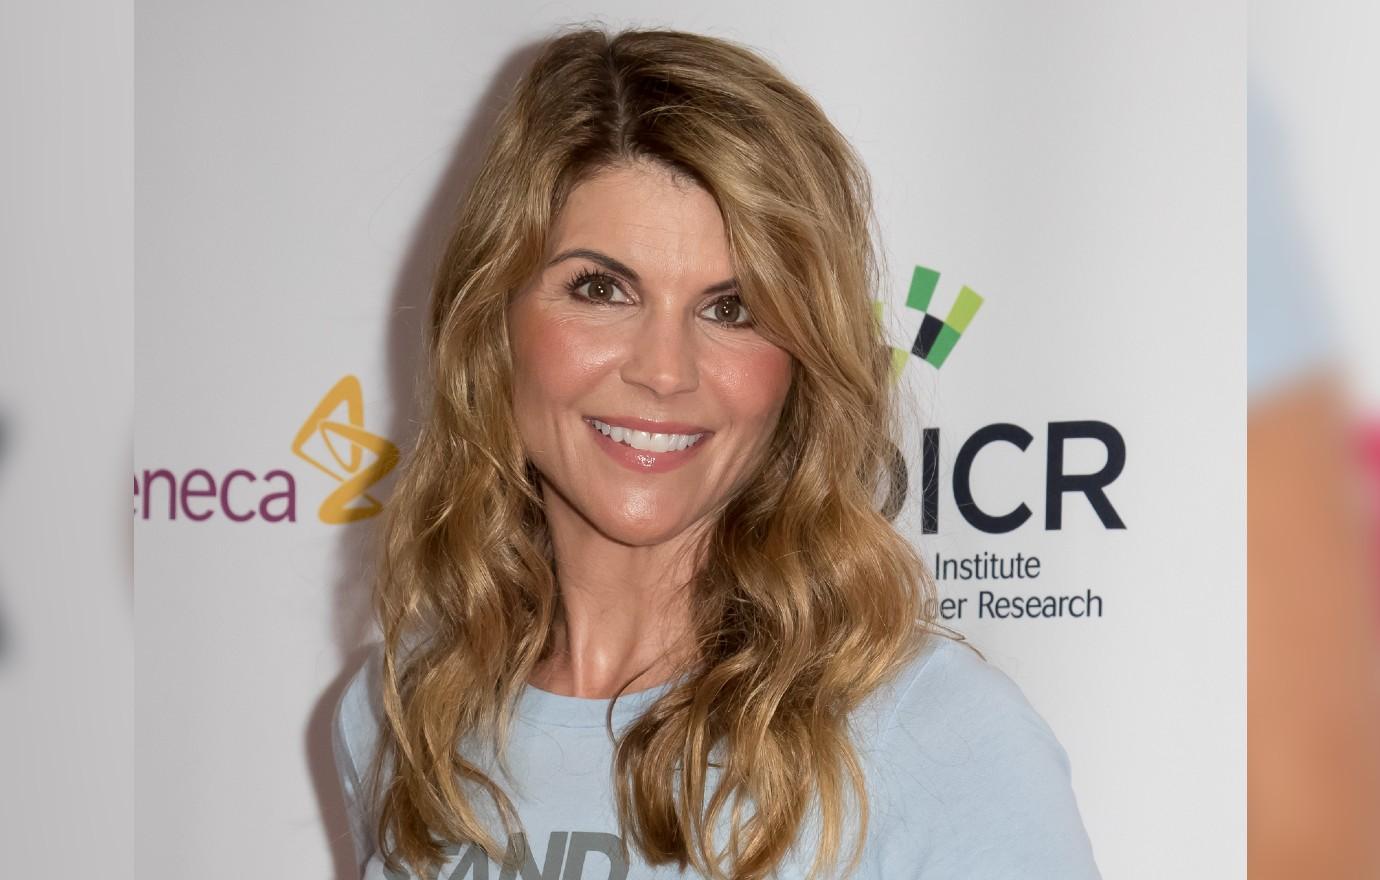 Lori Loughlin marks return to acting with 'When Hope Calls: A